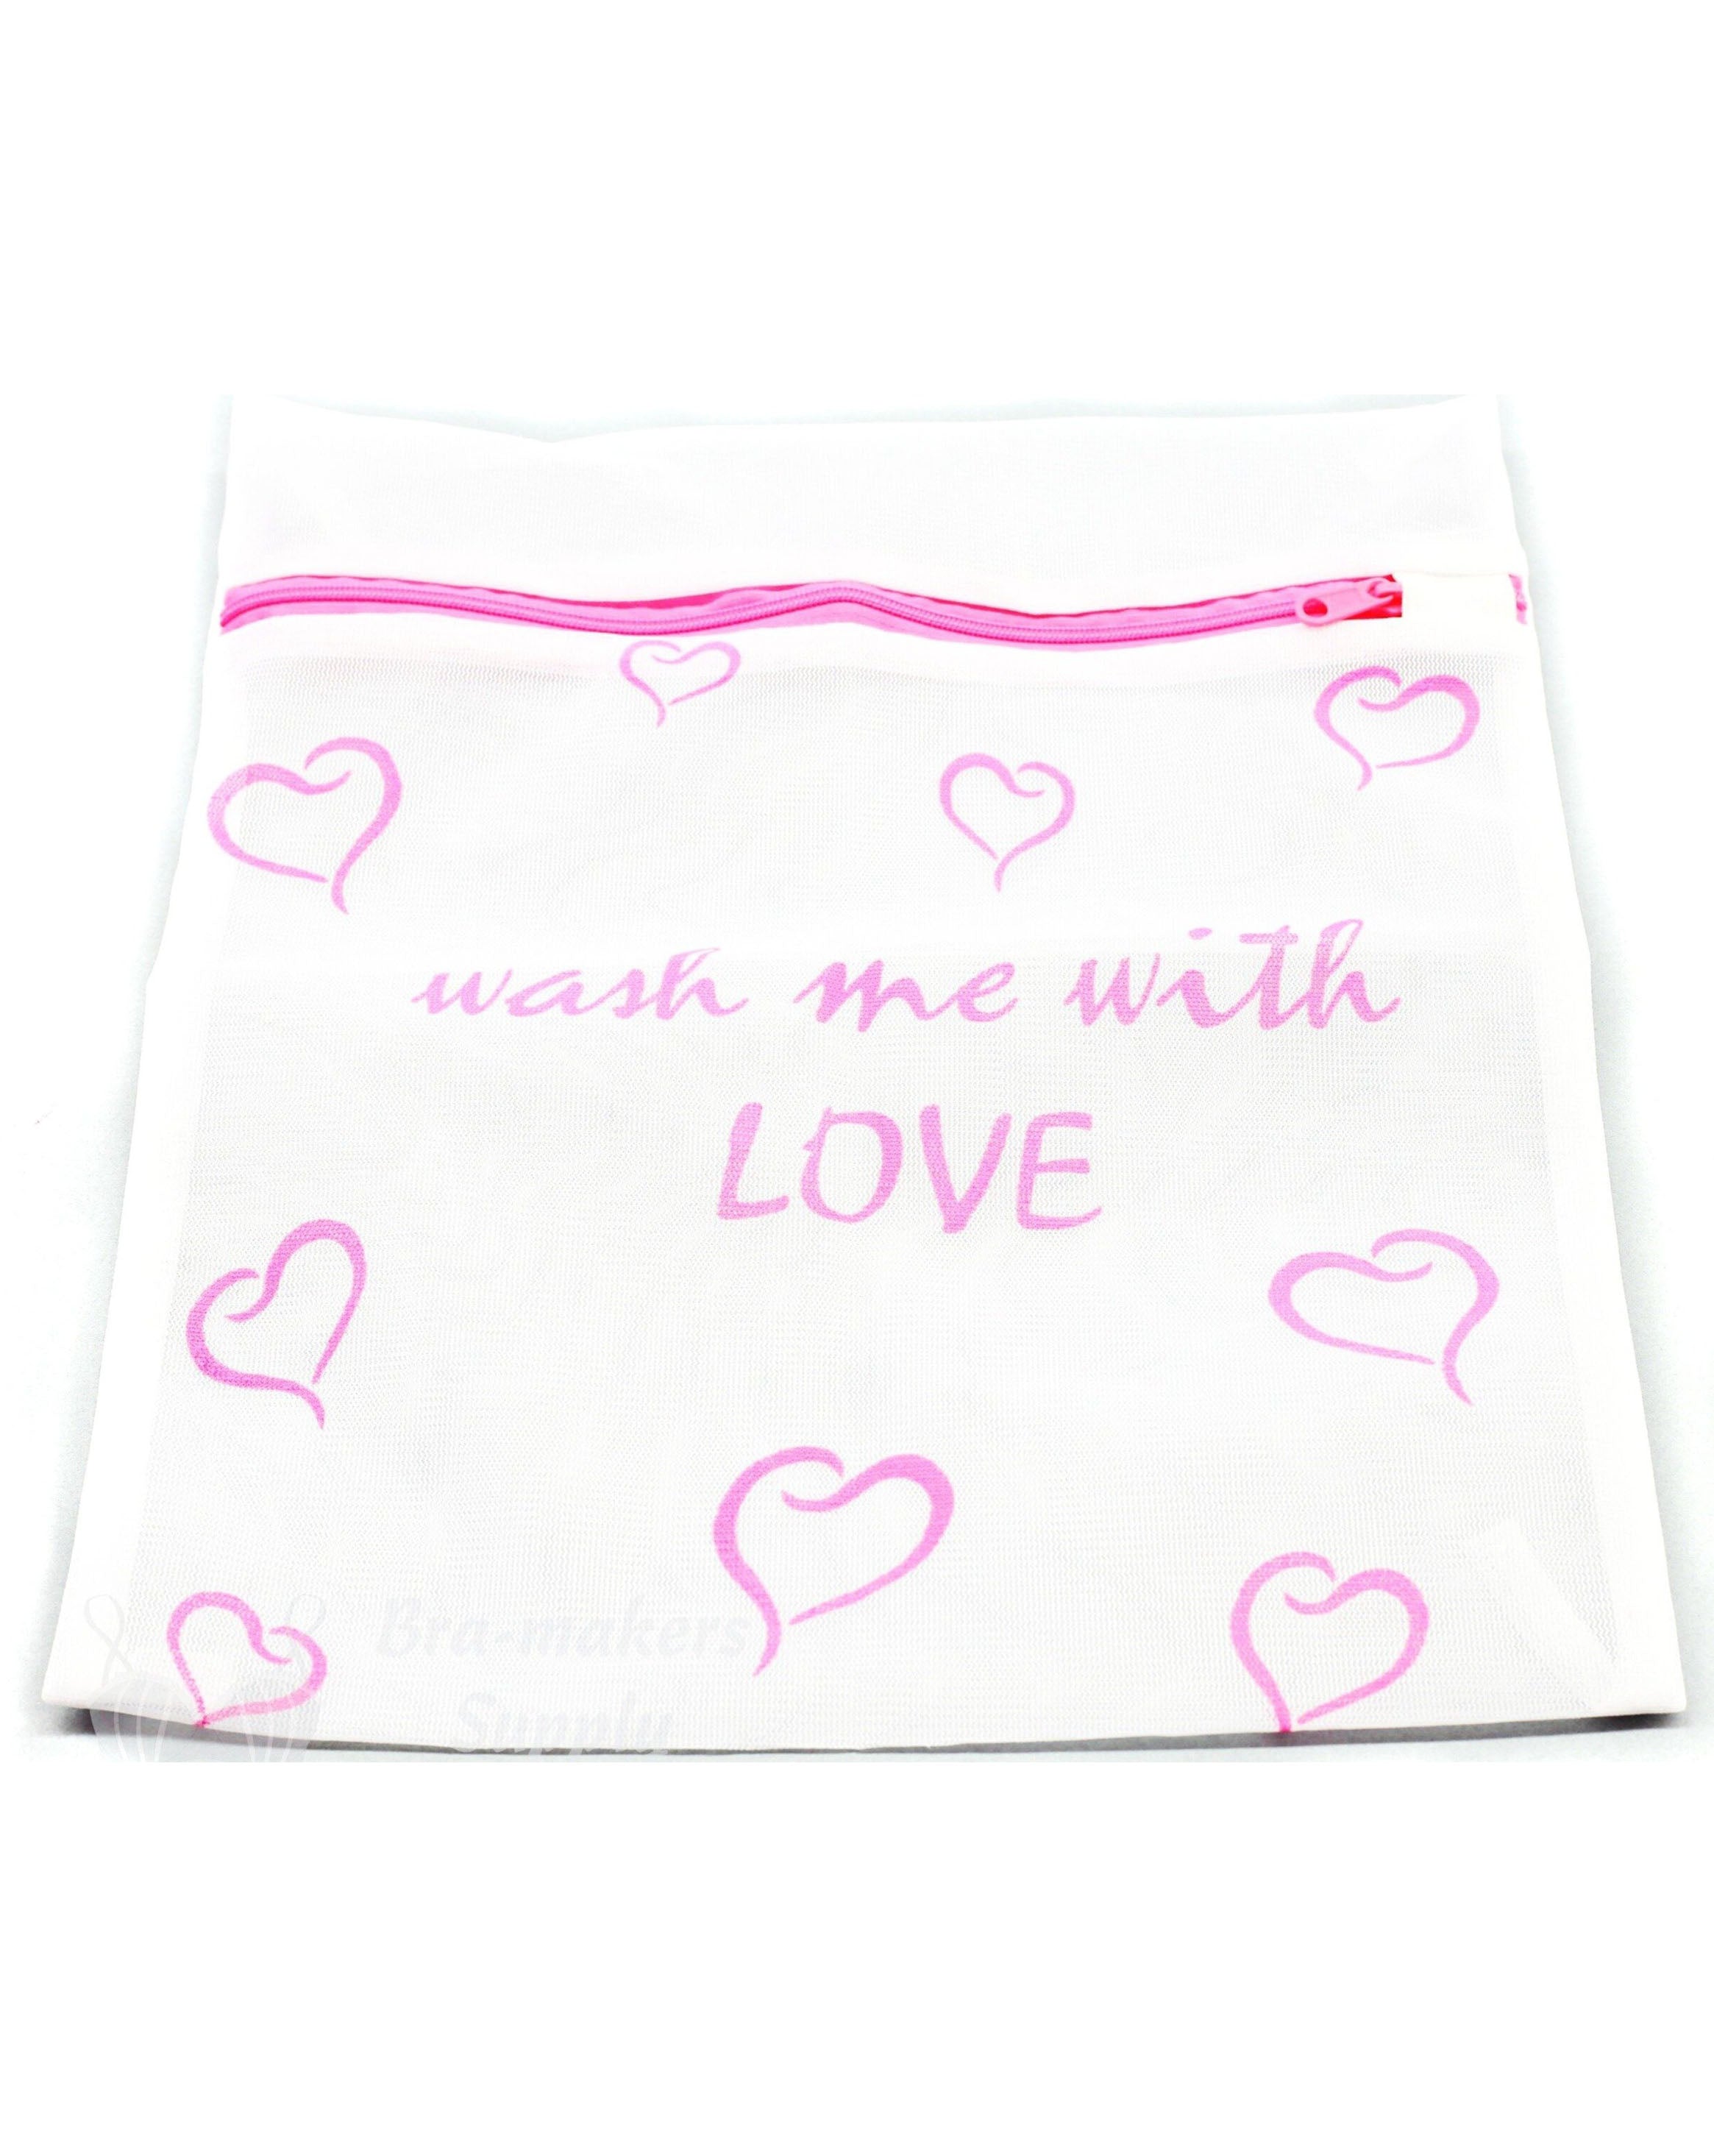 pink hearts on white lingerie wash bag. Contains text "wash me with love"."